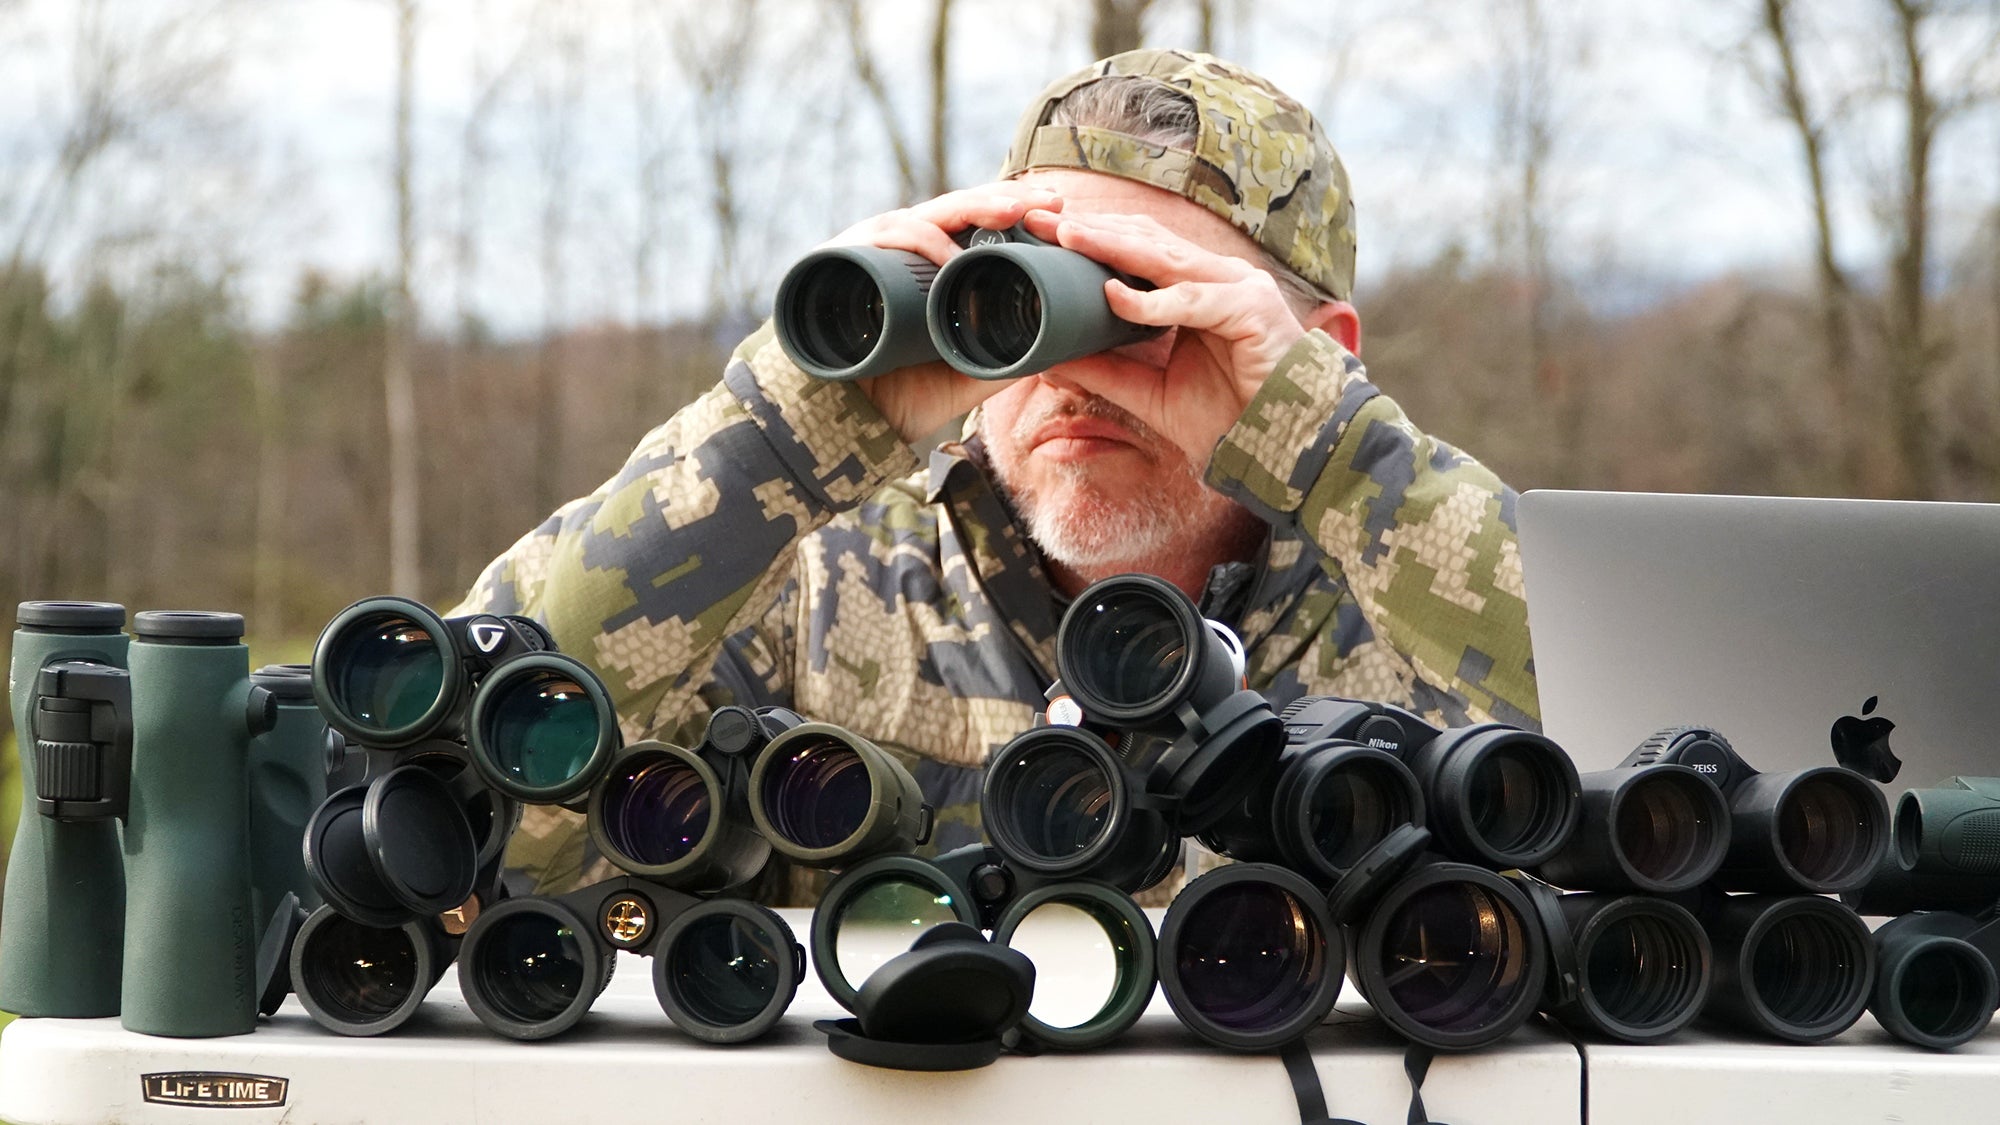 The author tests a pair of binoculars at a table laden with other binoculars